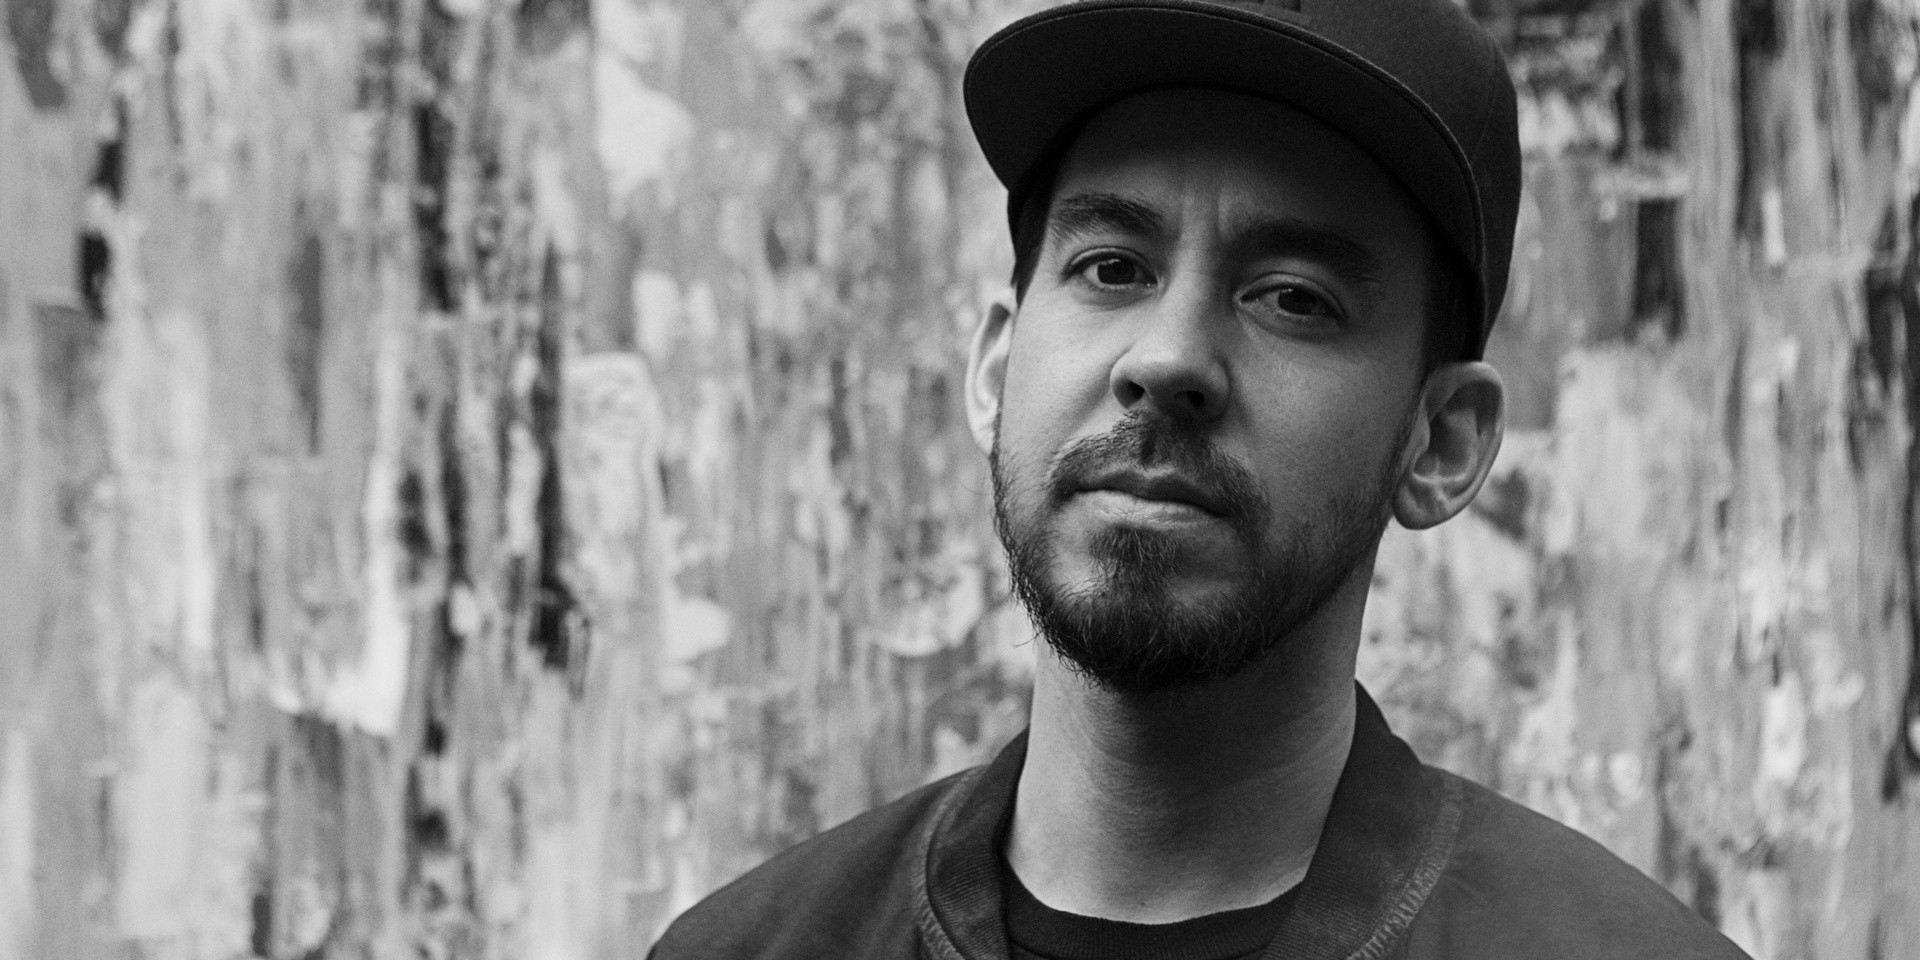 Mike Shinoda of Linkin Park is coming to Singapore